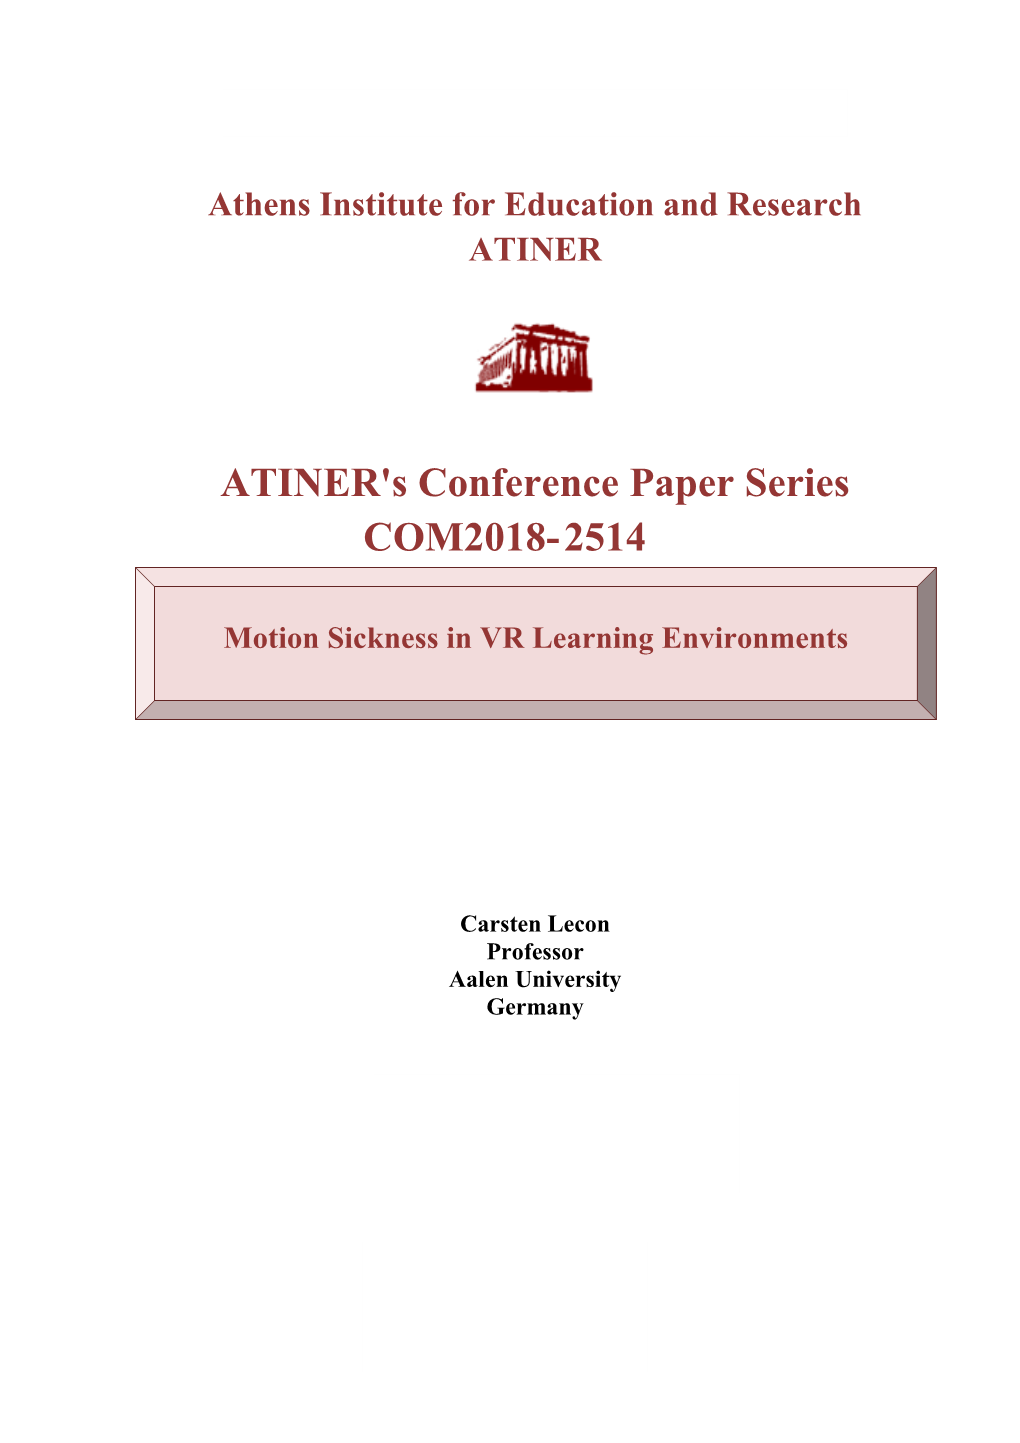 ATINER's Conference Paper Series COM2018-2514